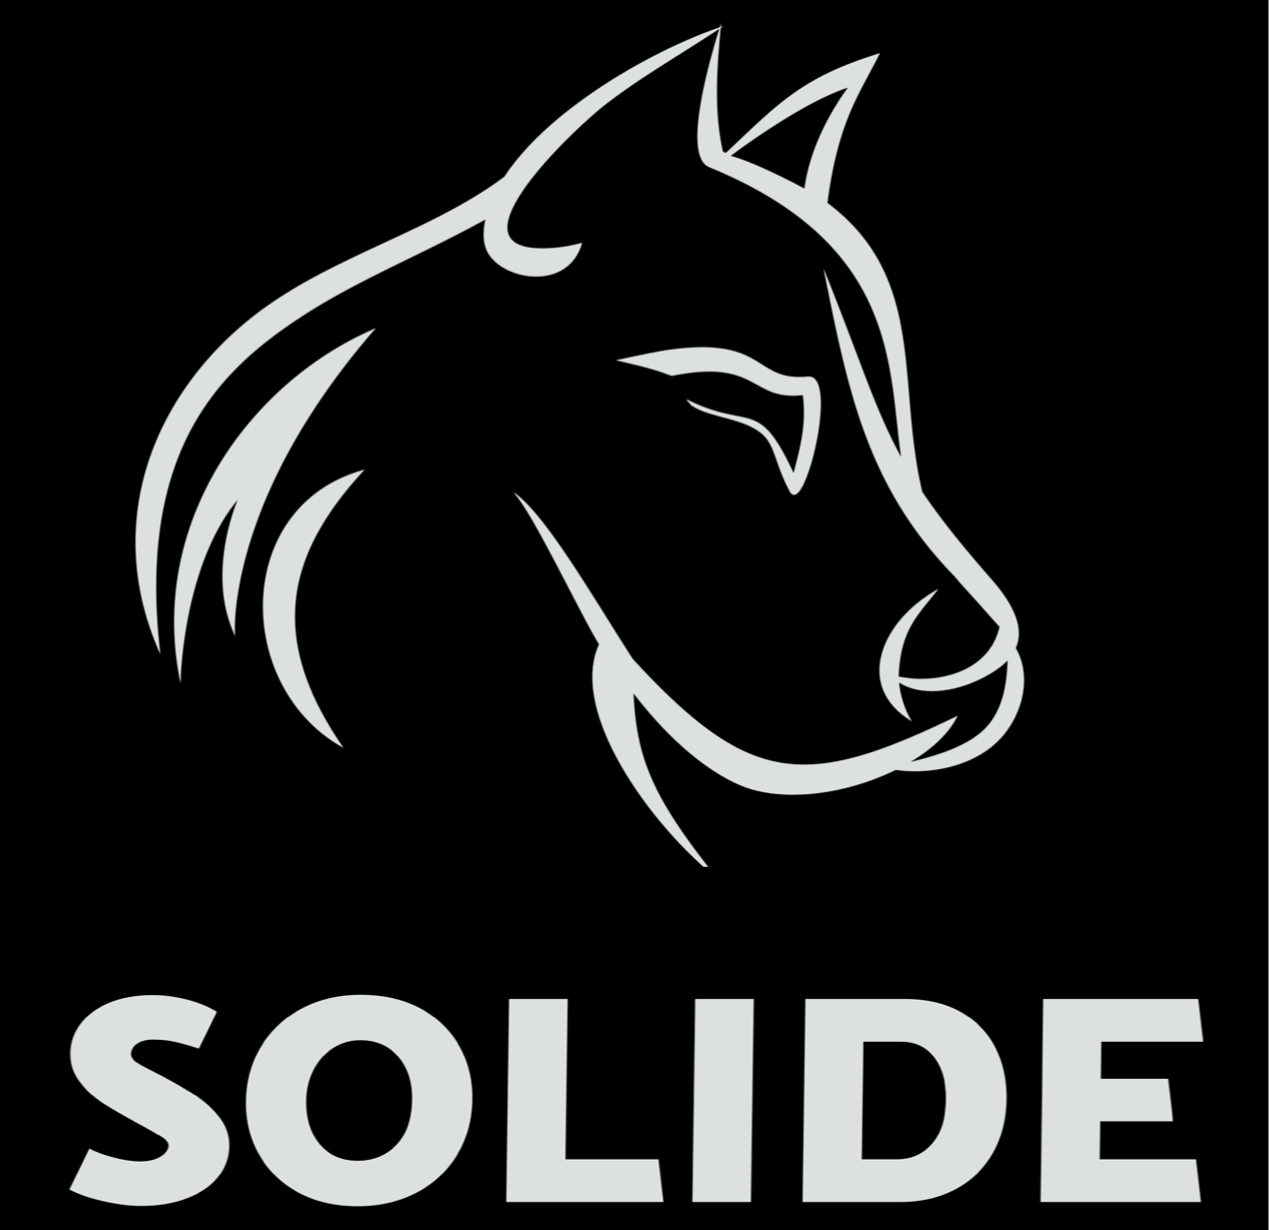 The Solide